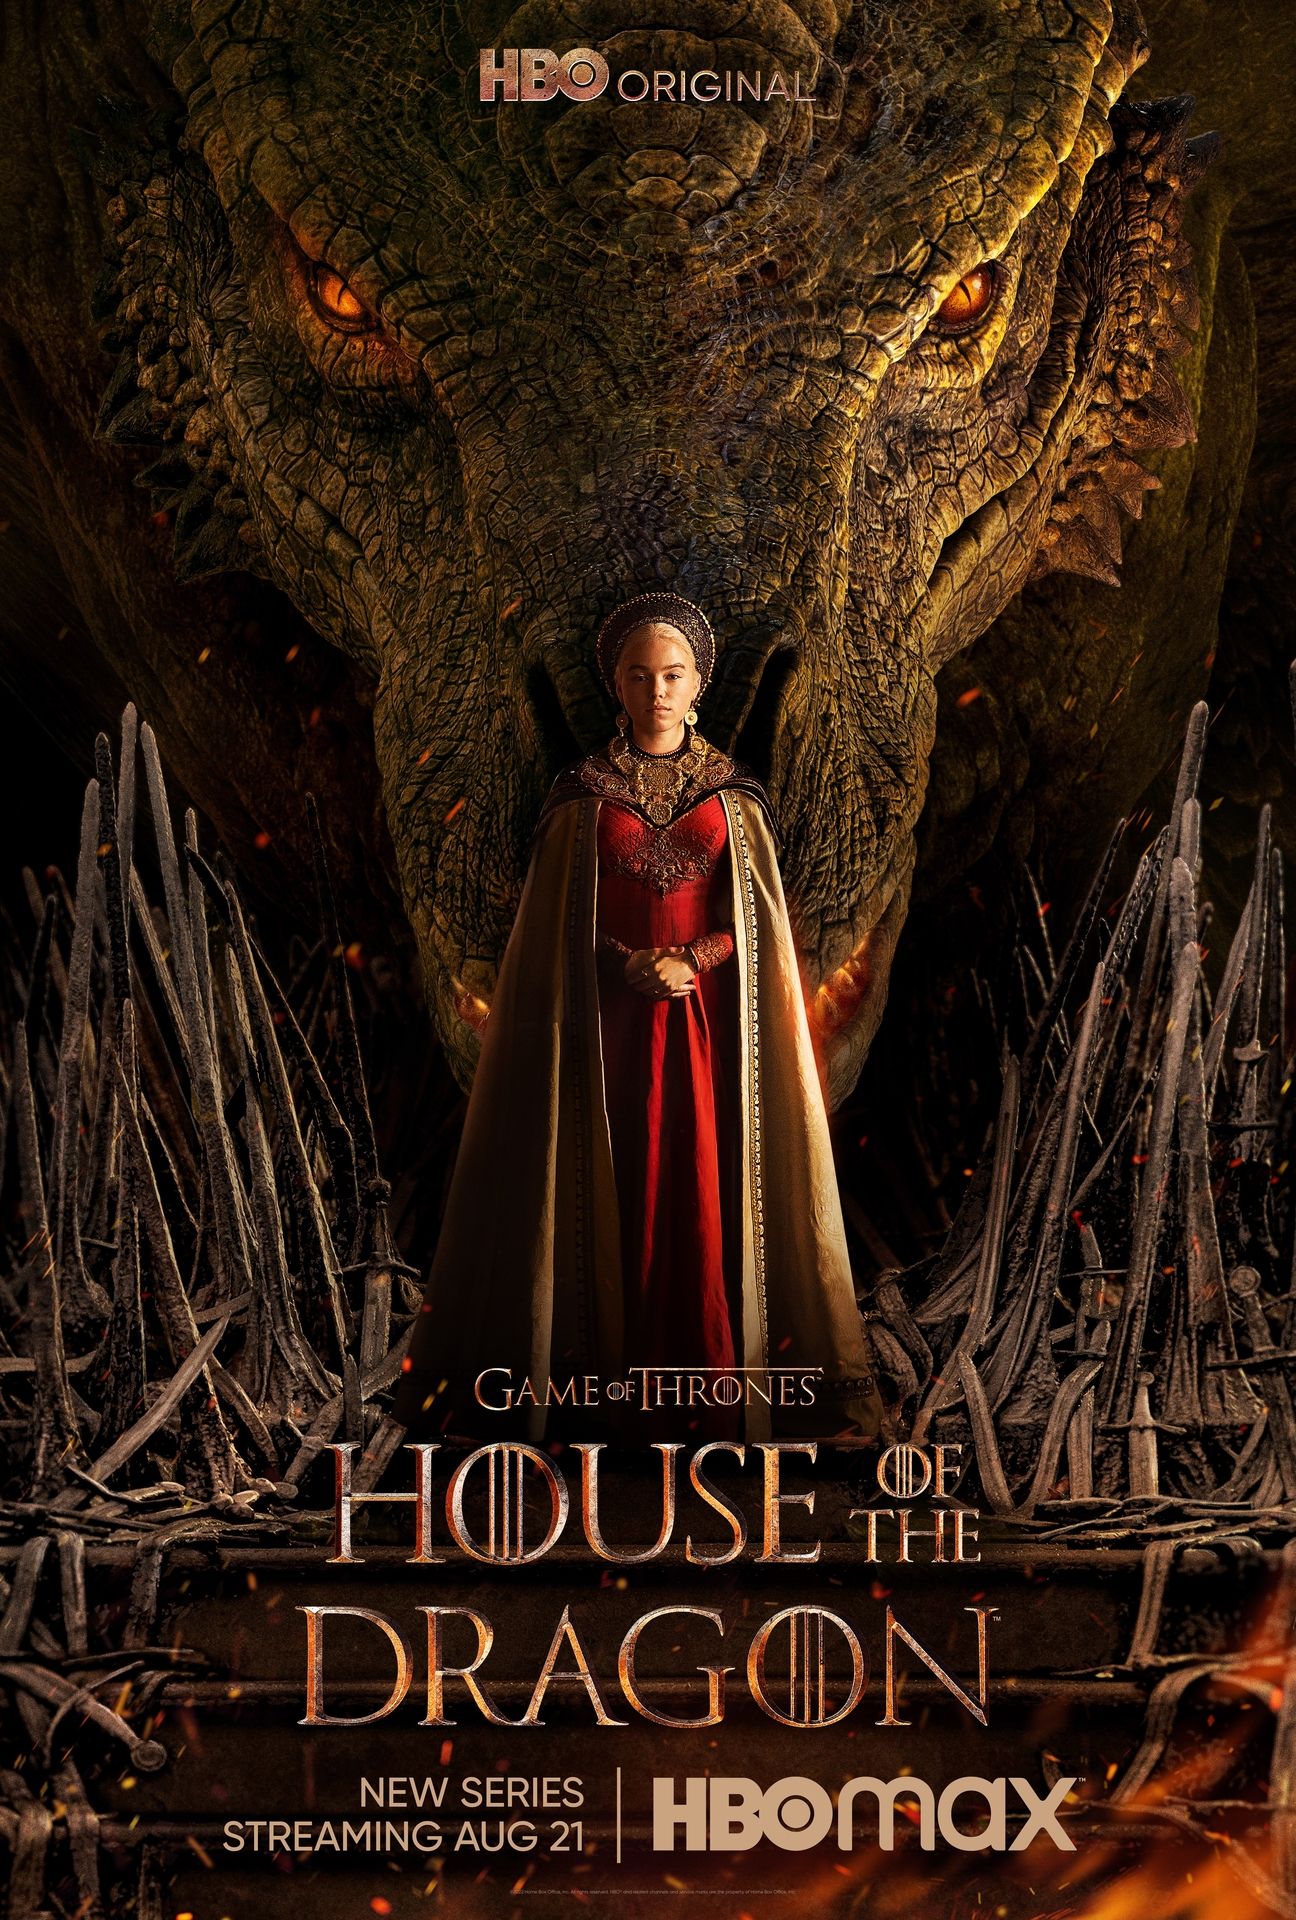 Where was 'House of the Dragon' filmed?